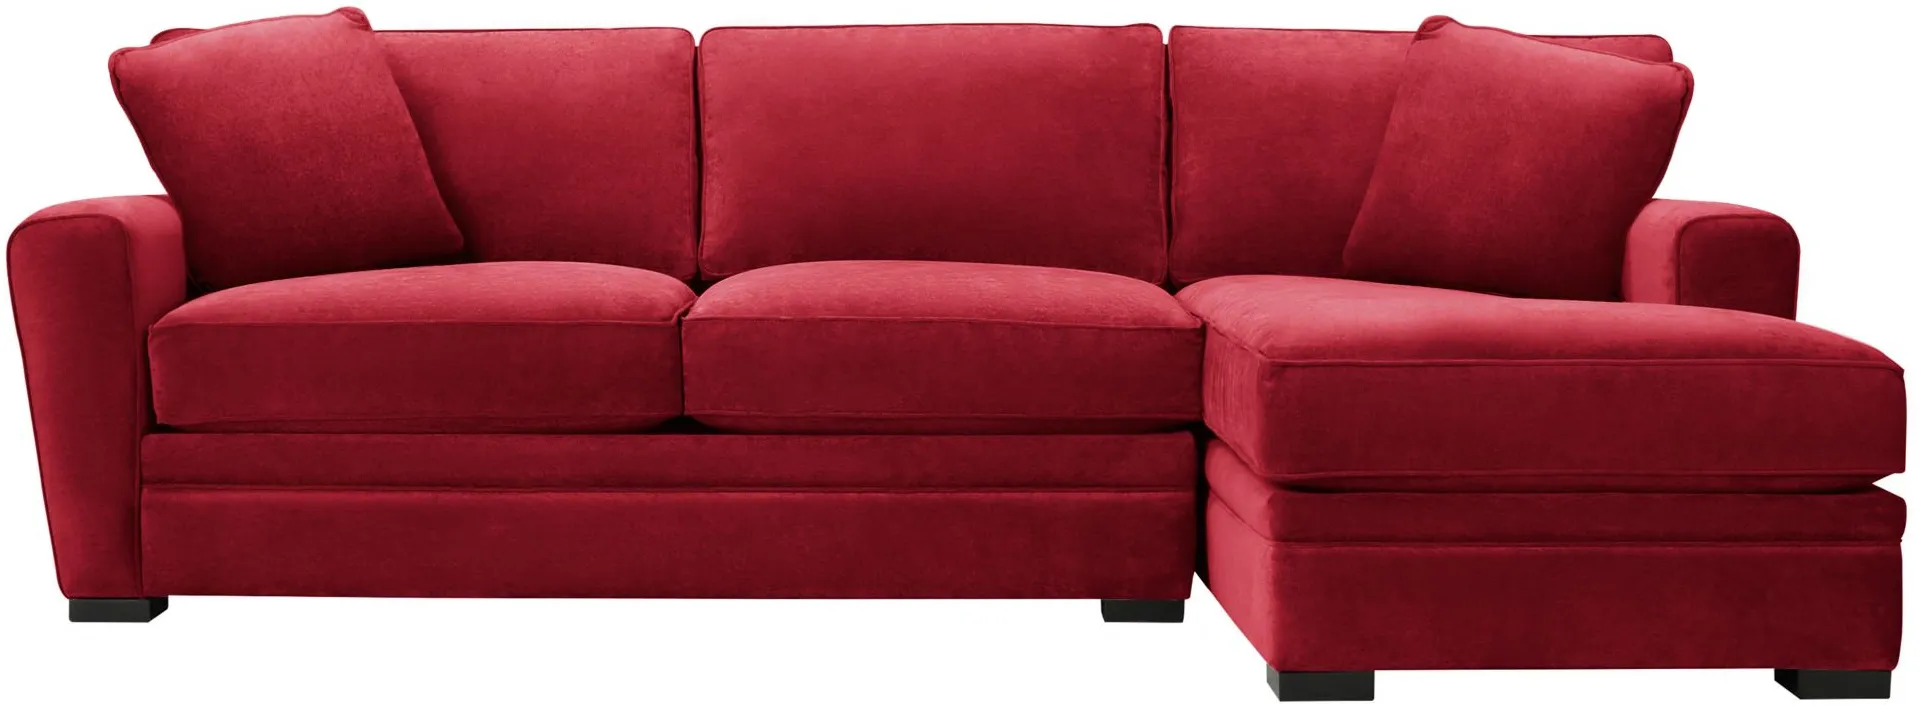 Artemis II 2-pc. Full Sleeper Right Hand Facing Sectional Sofa in Gypsy Scarlet by Jonathan Louis